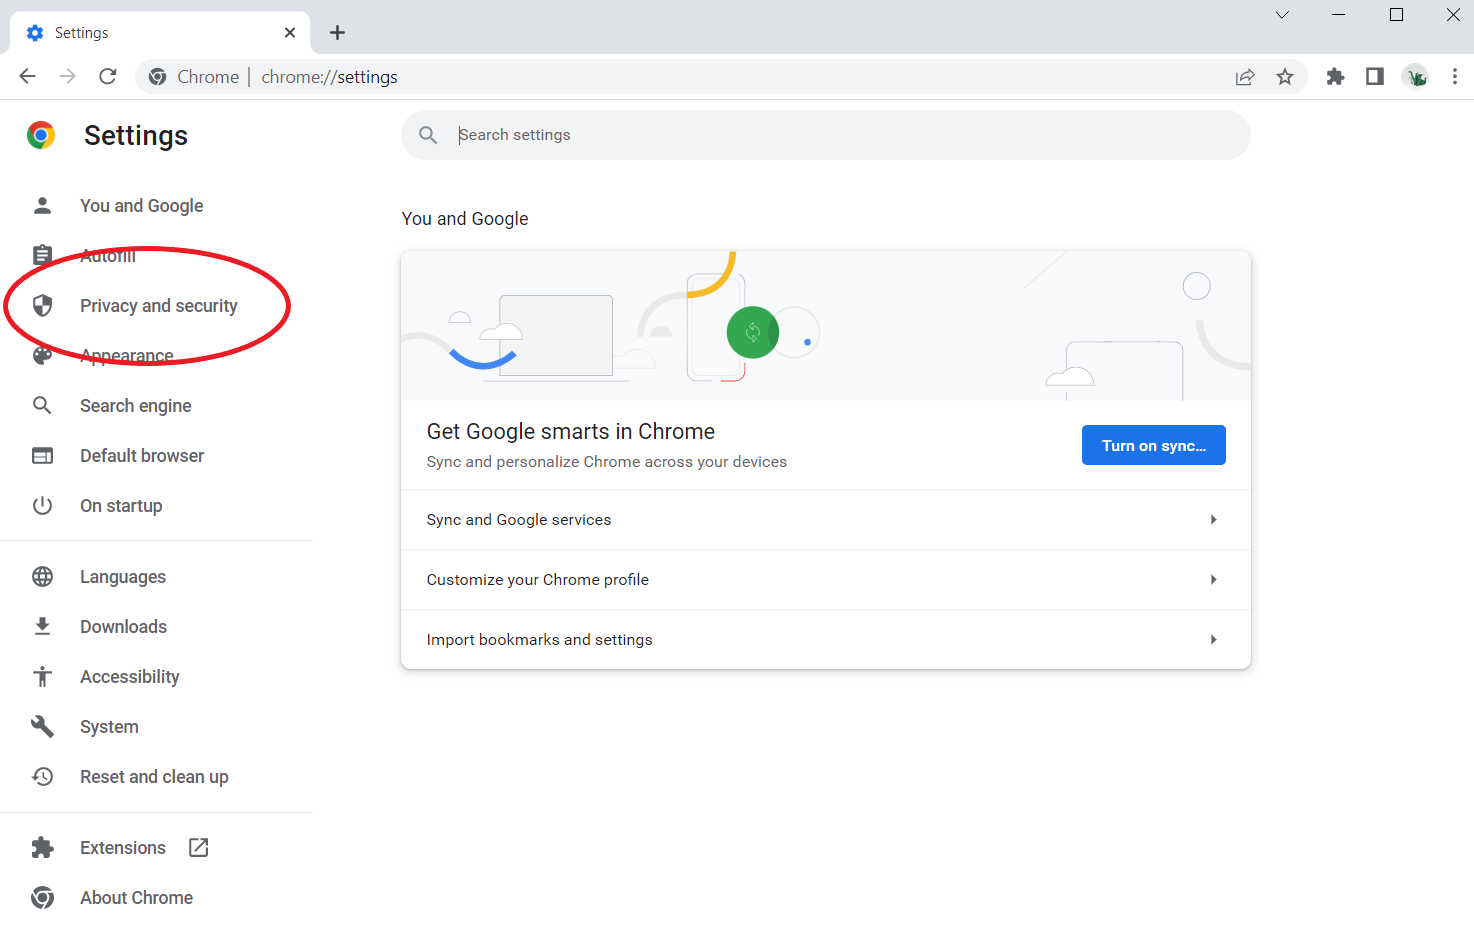 Screenshot of the Google Chrome Settings screen with the Privacy and security option circled.